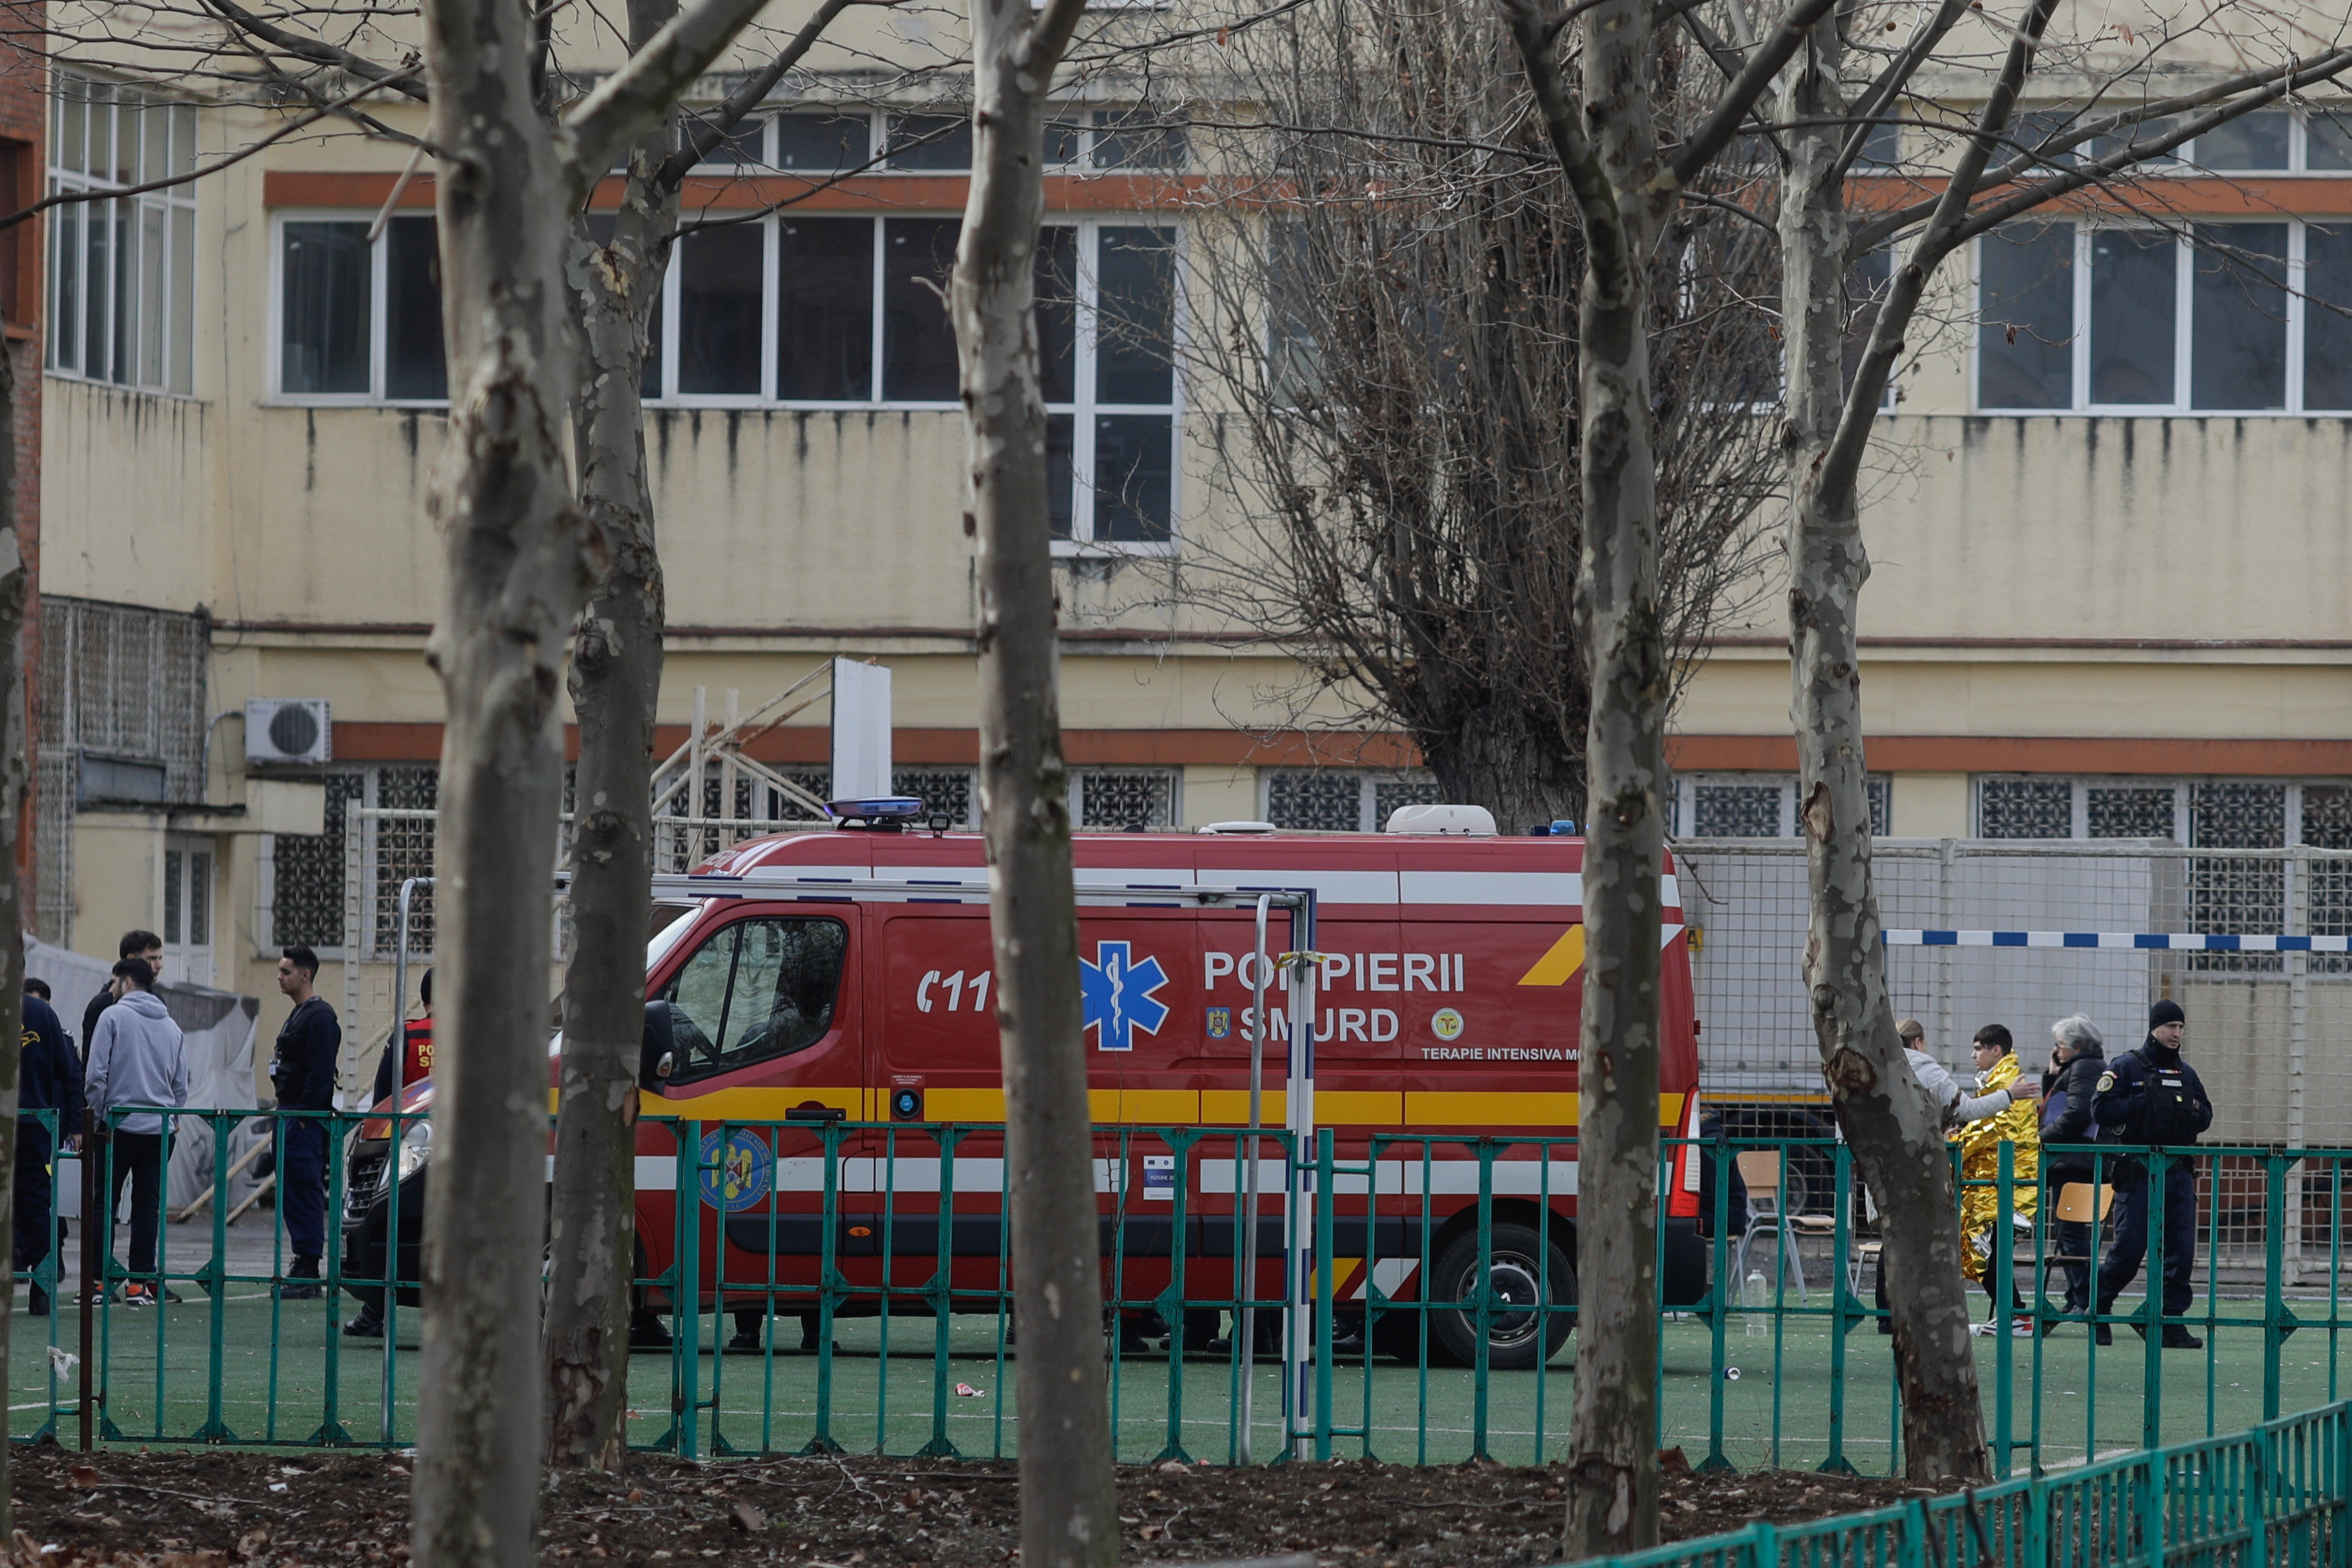 25 Romanian students rushed to hospital after a paralyzing spray was used in high school hallway